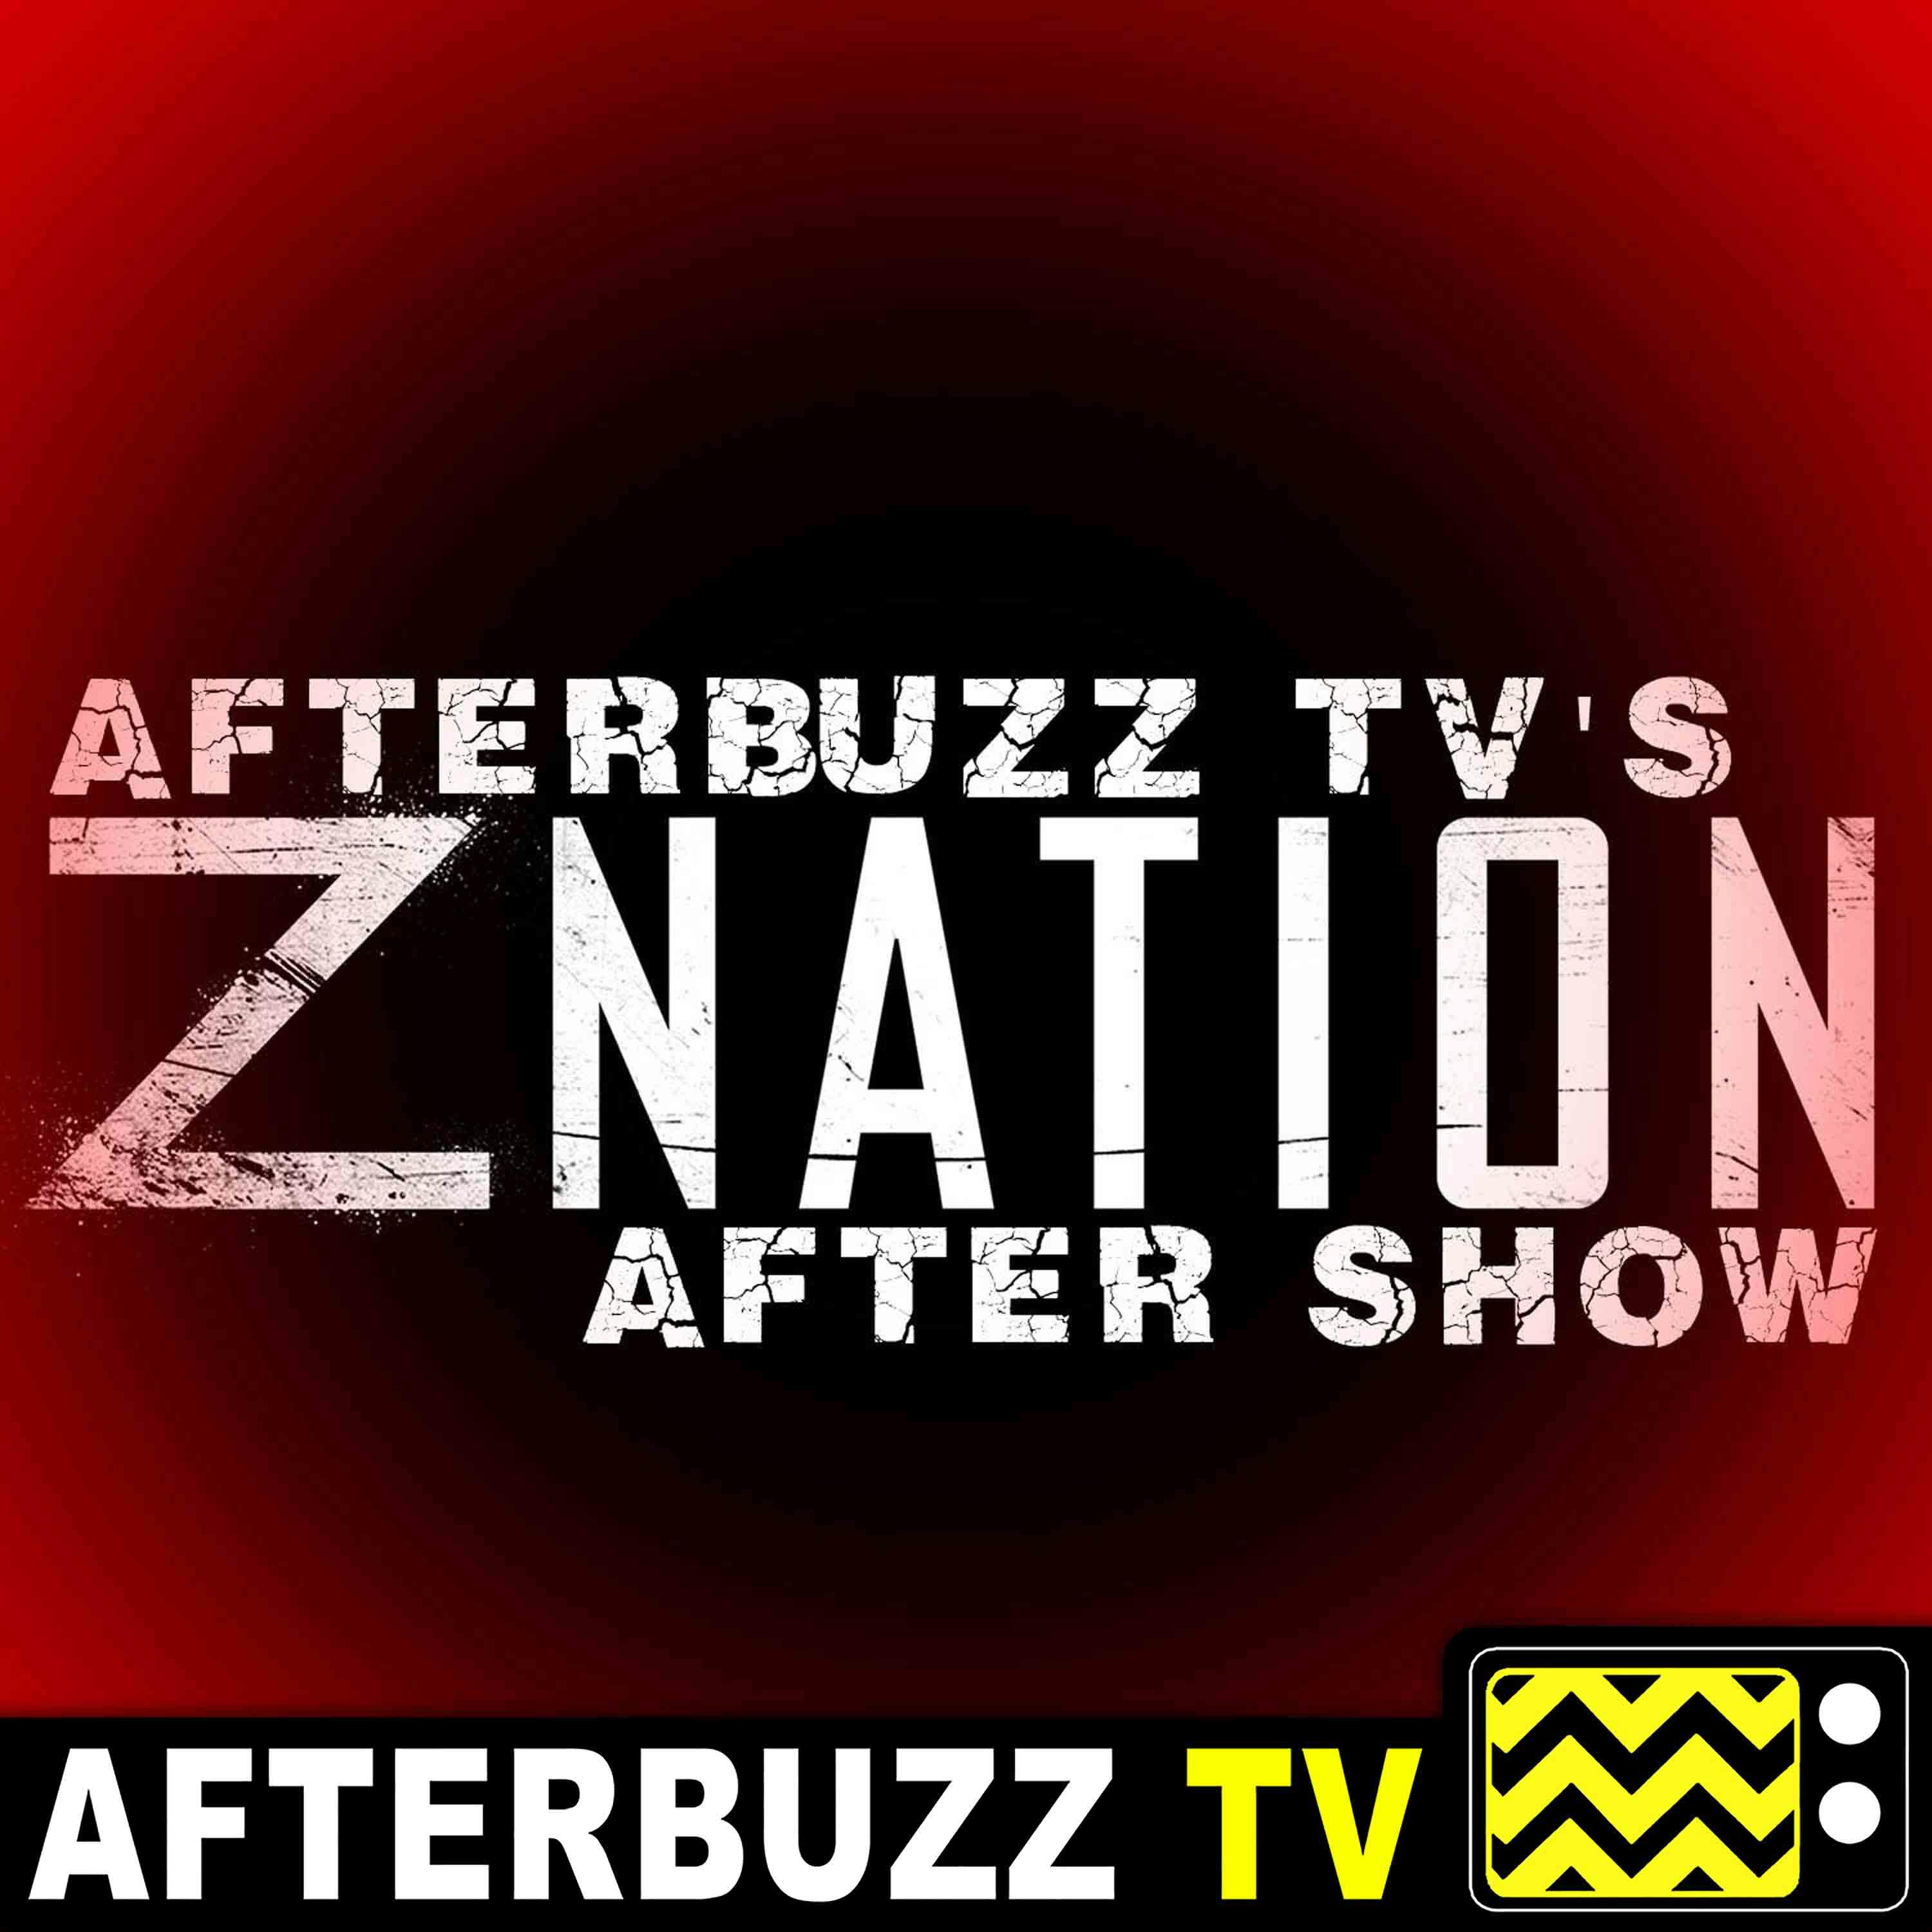 Juan Mas guests on Z Nation S:5 Killing All The Books E:5